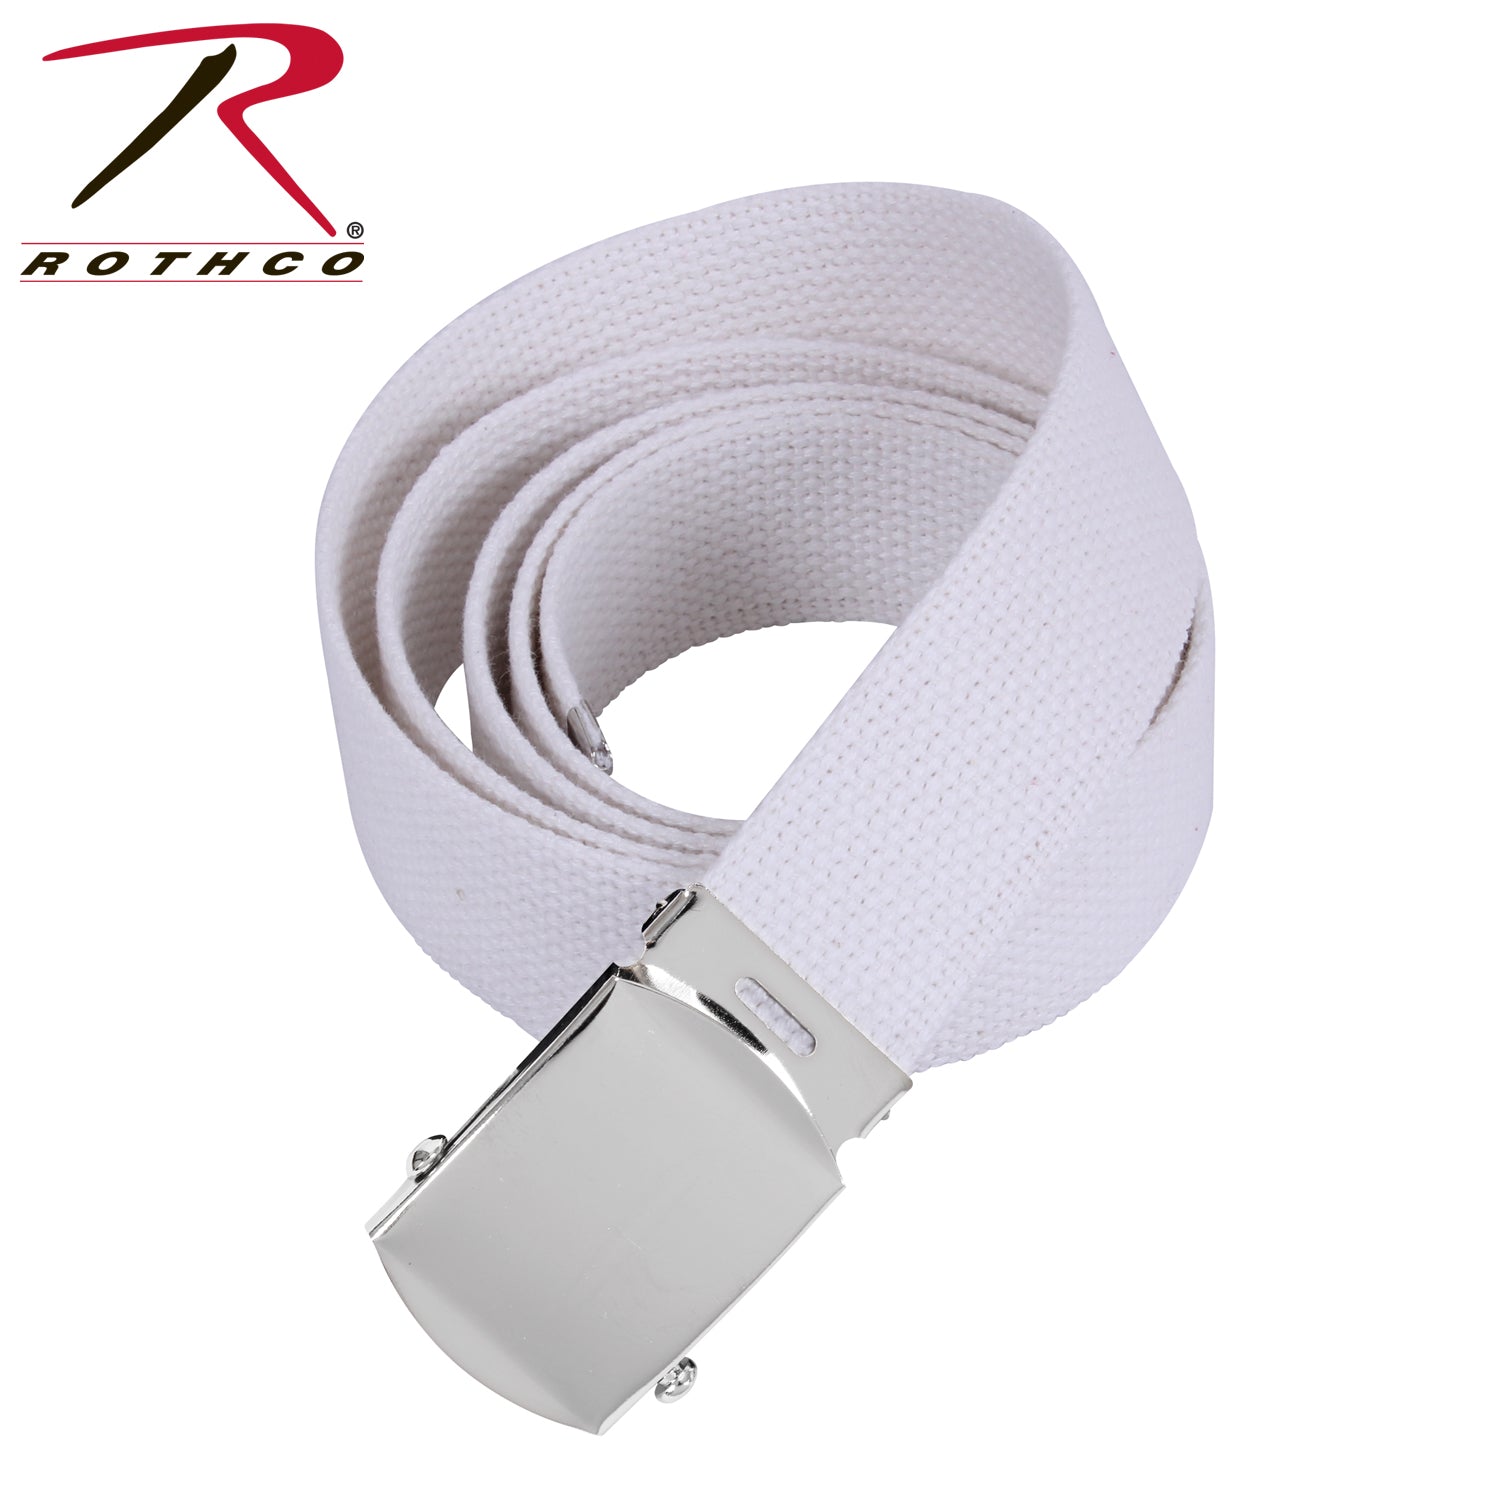 Rothco Military Web Belt - 44 Inches Long